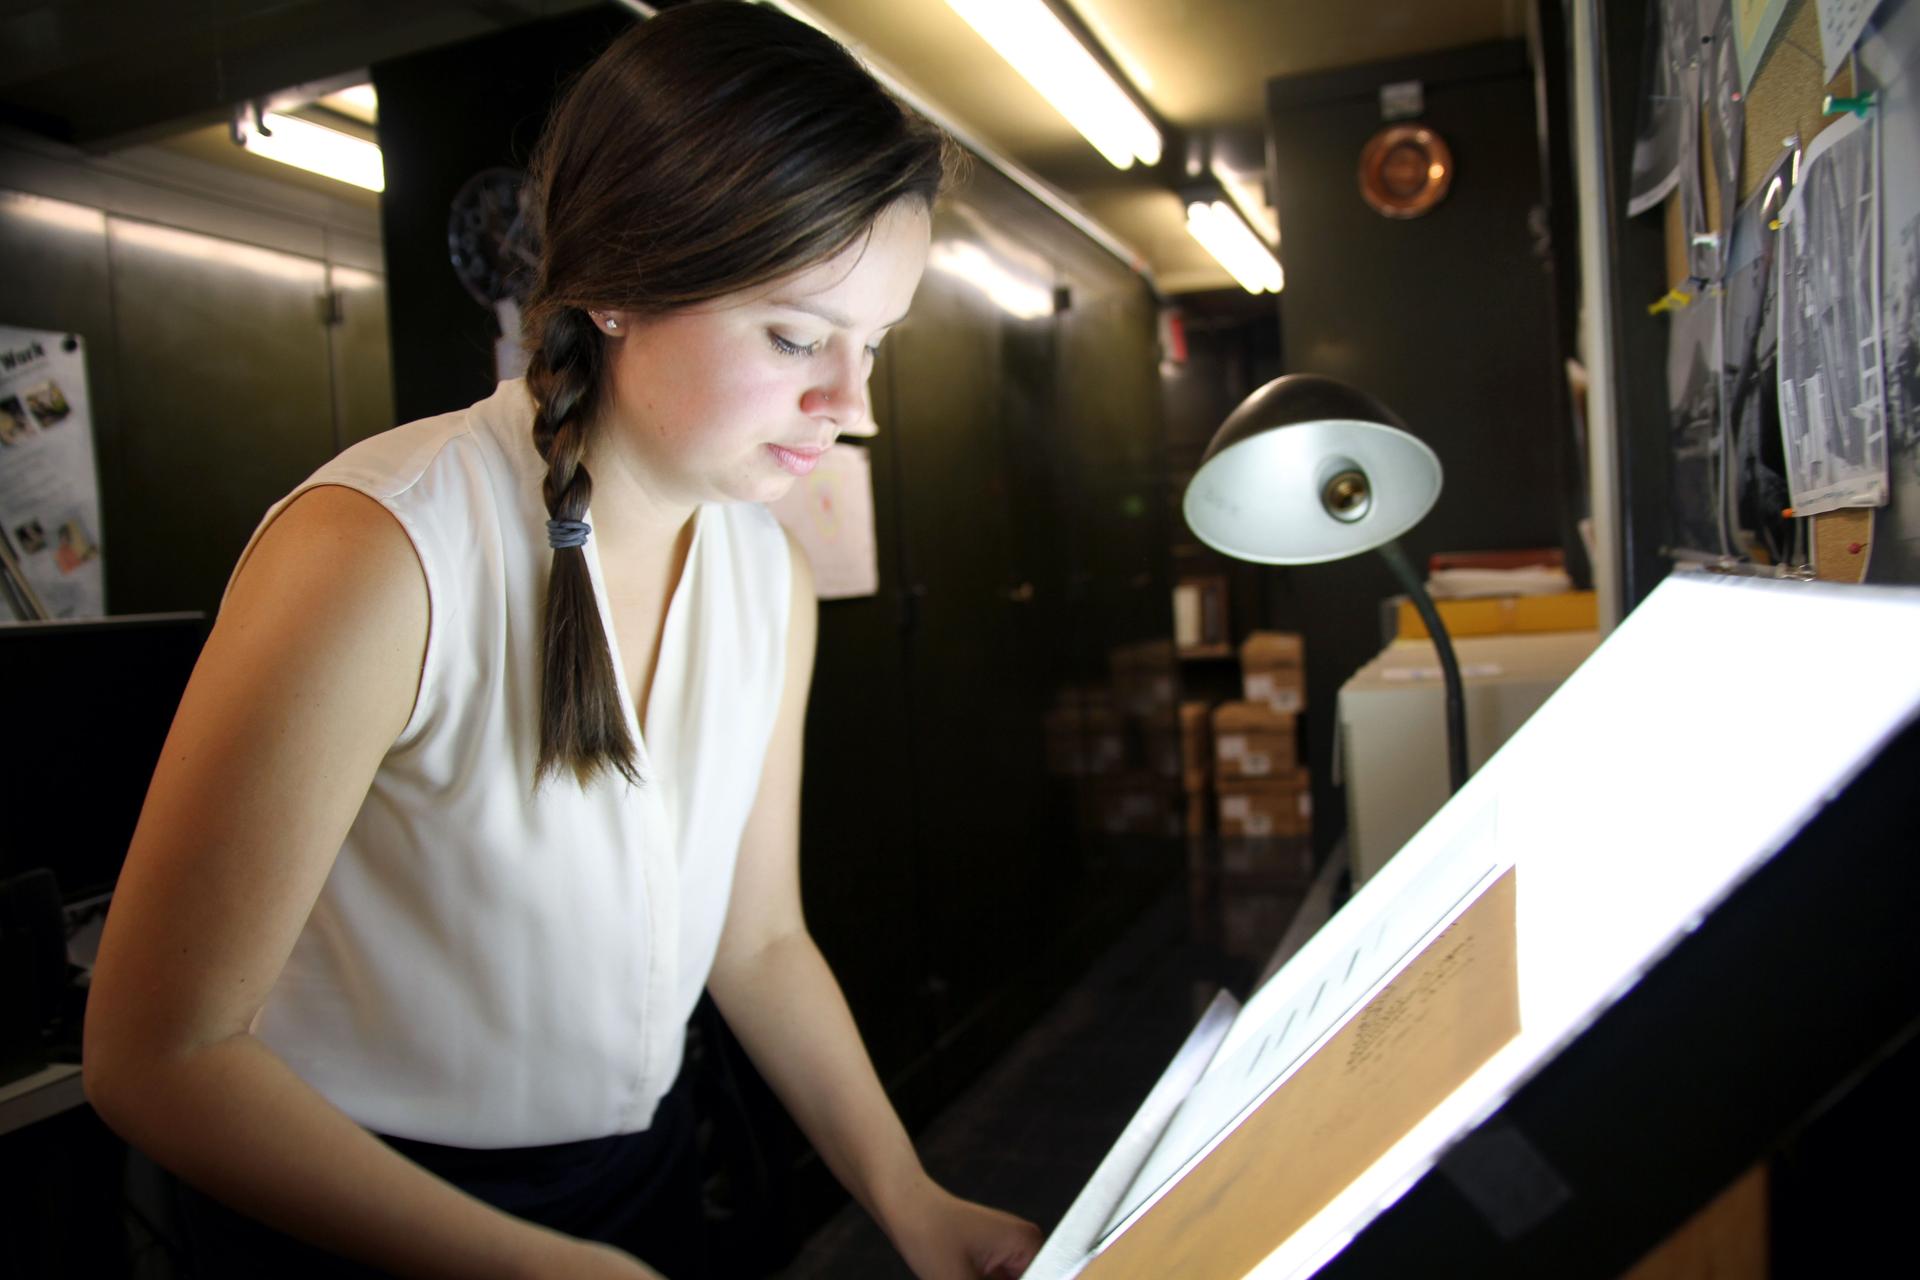 Lindsay Smith Zrull carefully places a glass plate photograph of the sky on a lightbox in the Plate Stacks room at the Harvard-Smithsonian Center for Astrophysics.